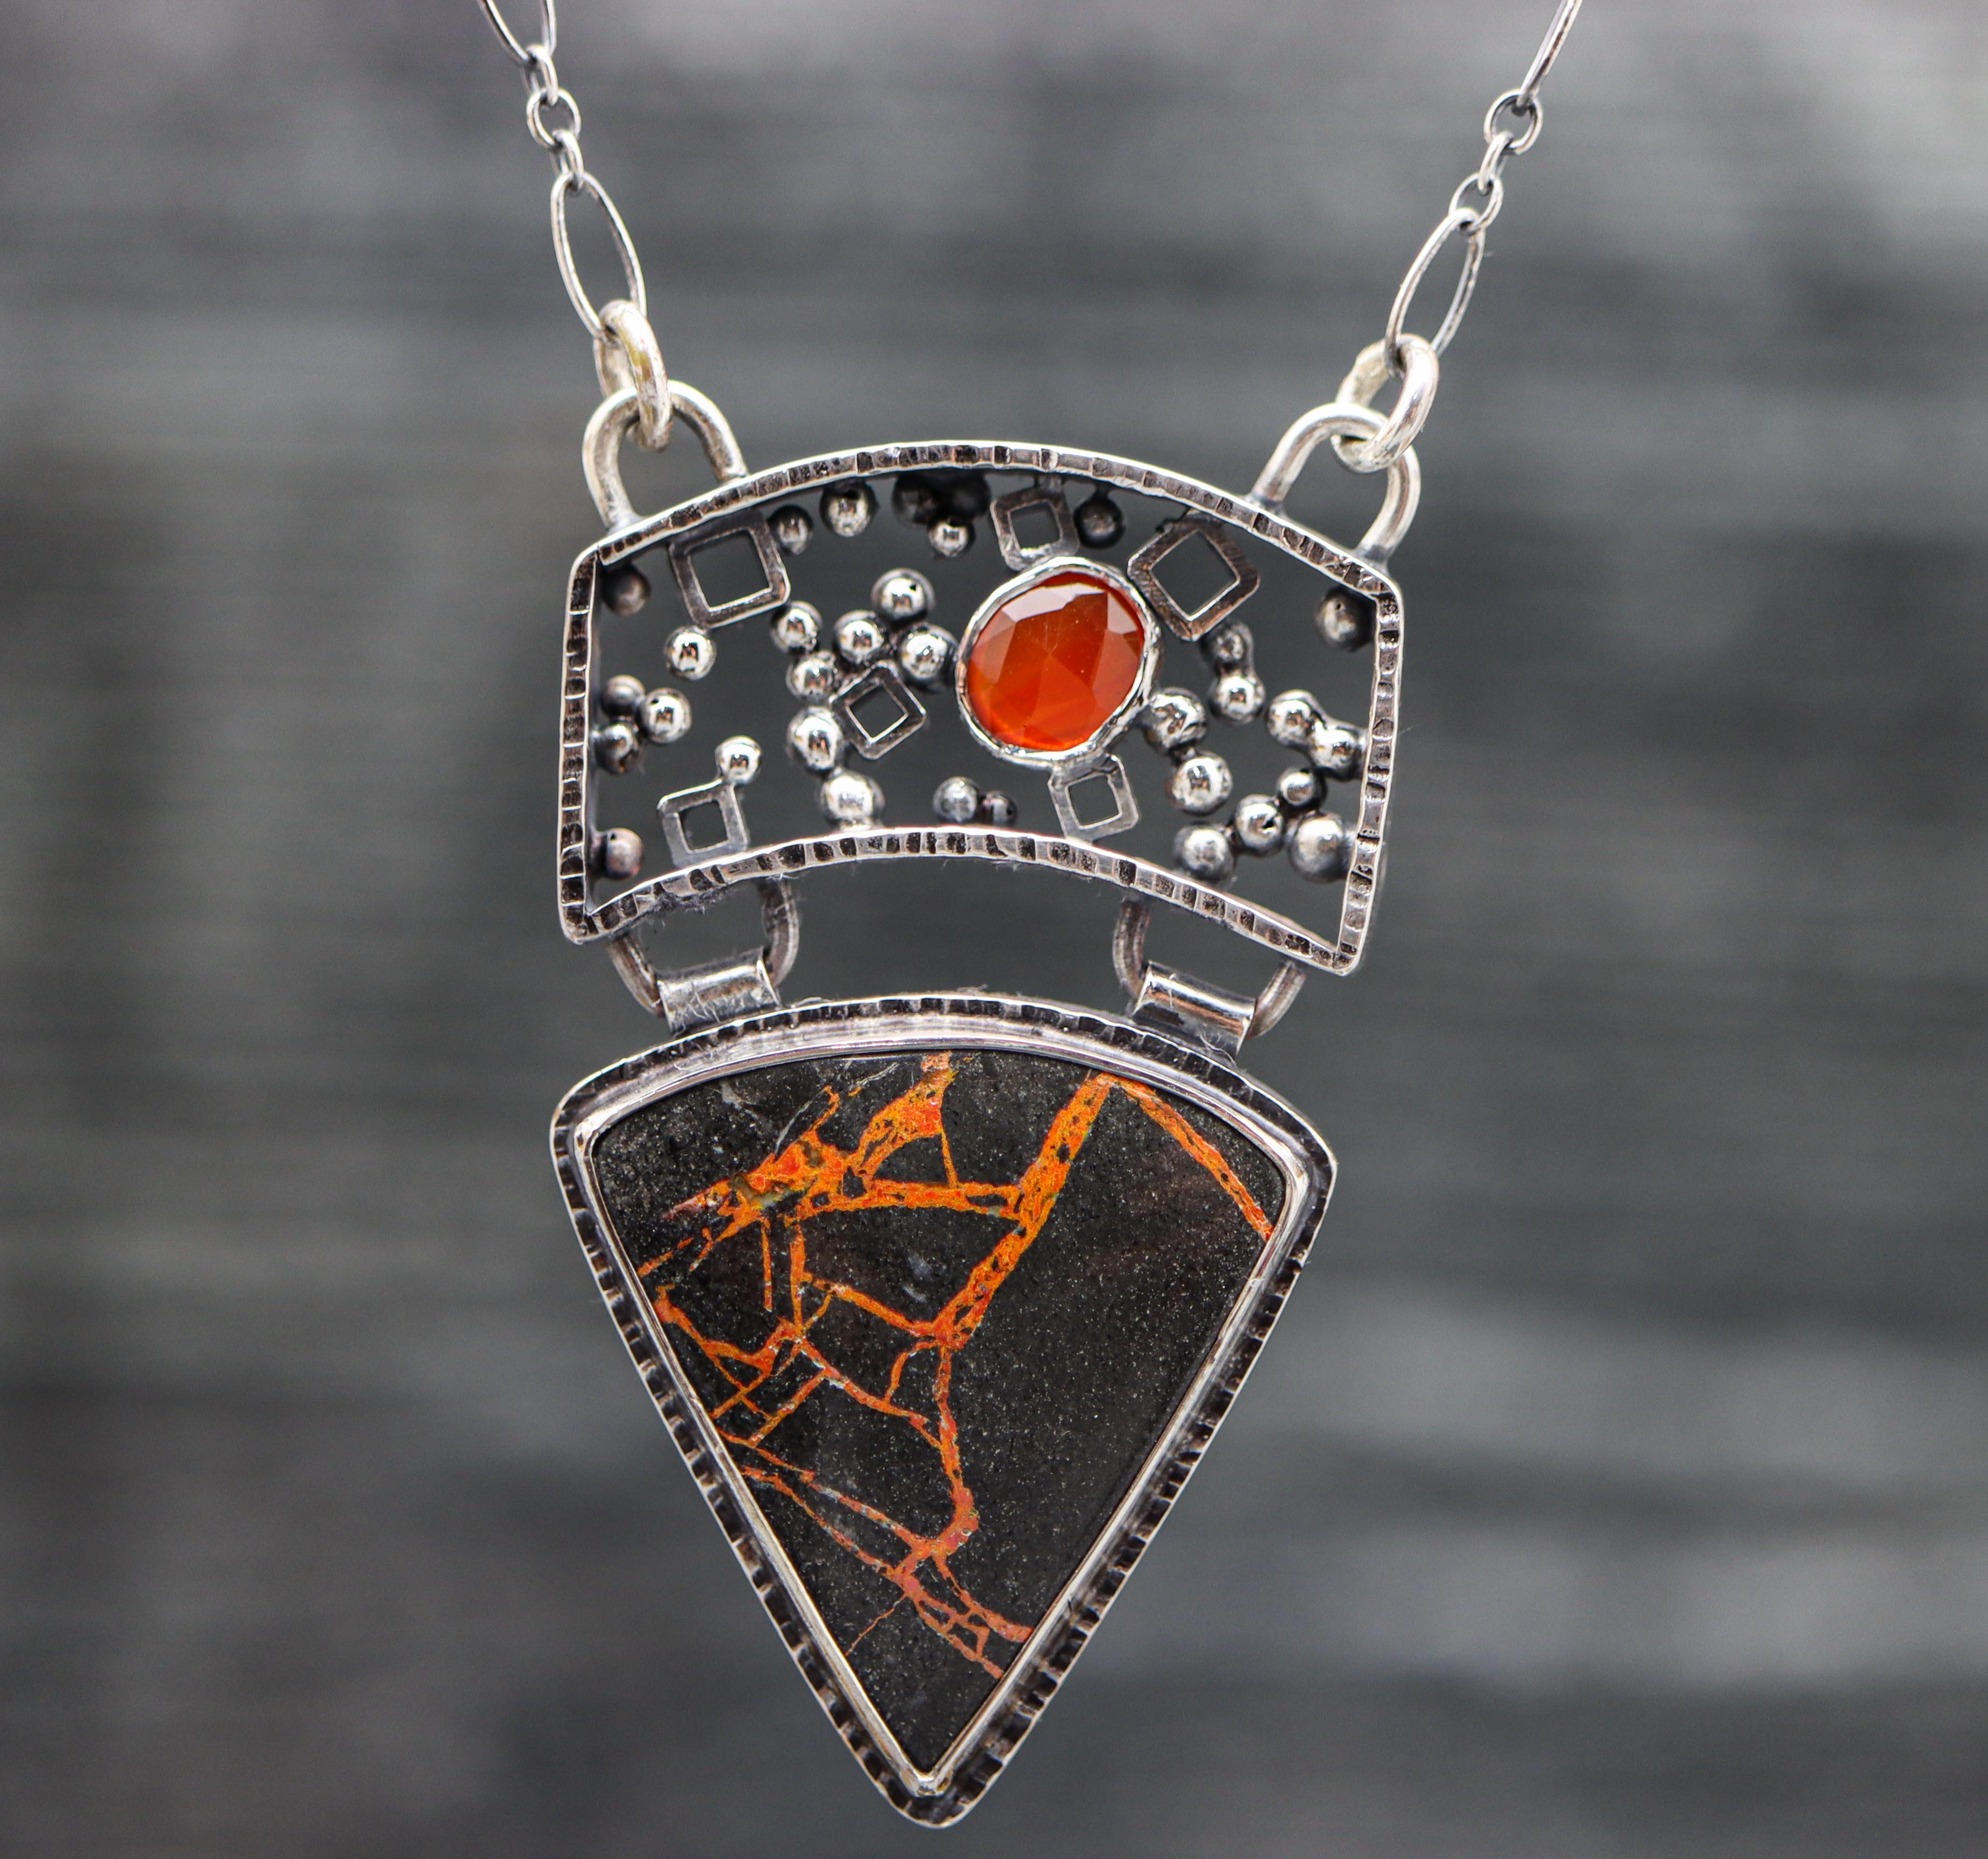 Lava Flow Jasper and Carnelian Pendant Sterling Silver One Of a Kind Gemstone Necklace